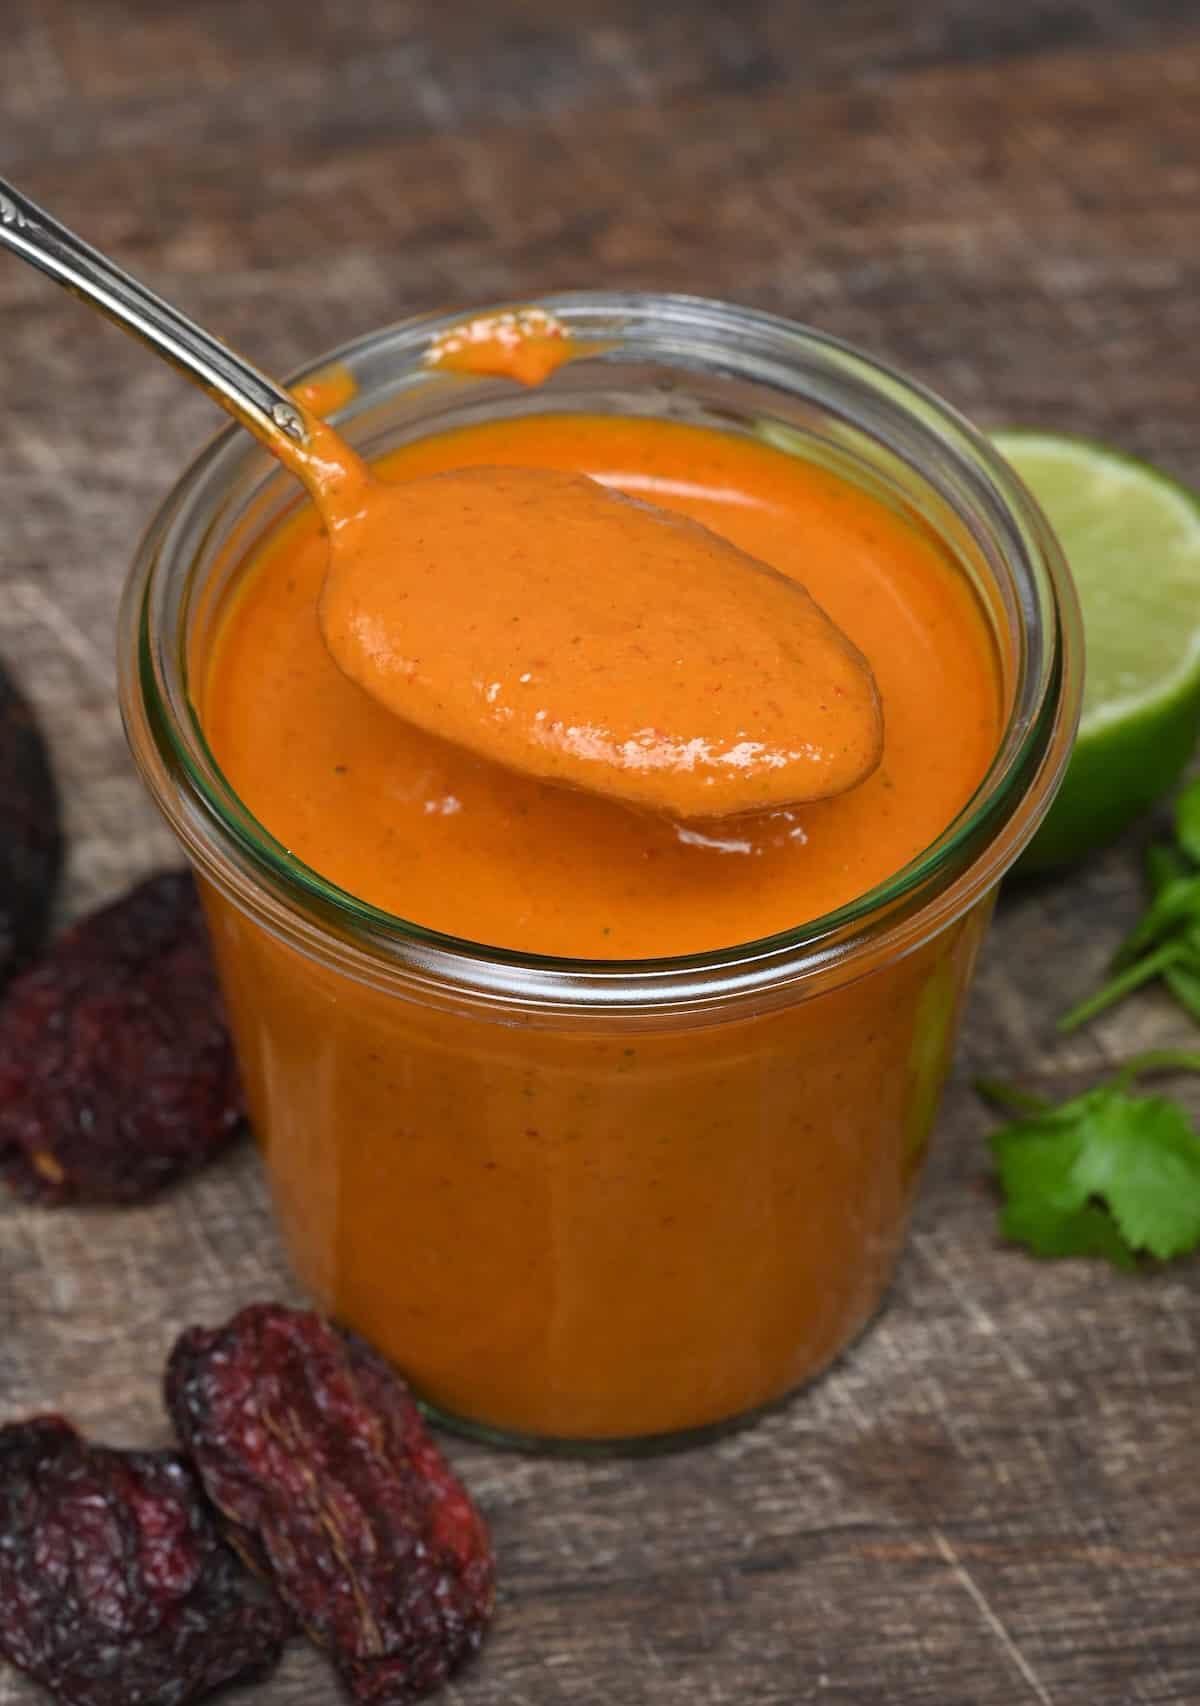 A spoonful of chipotle sauce over a jar